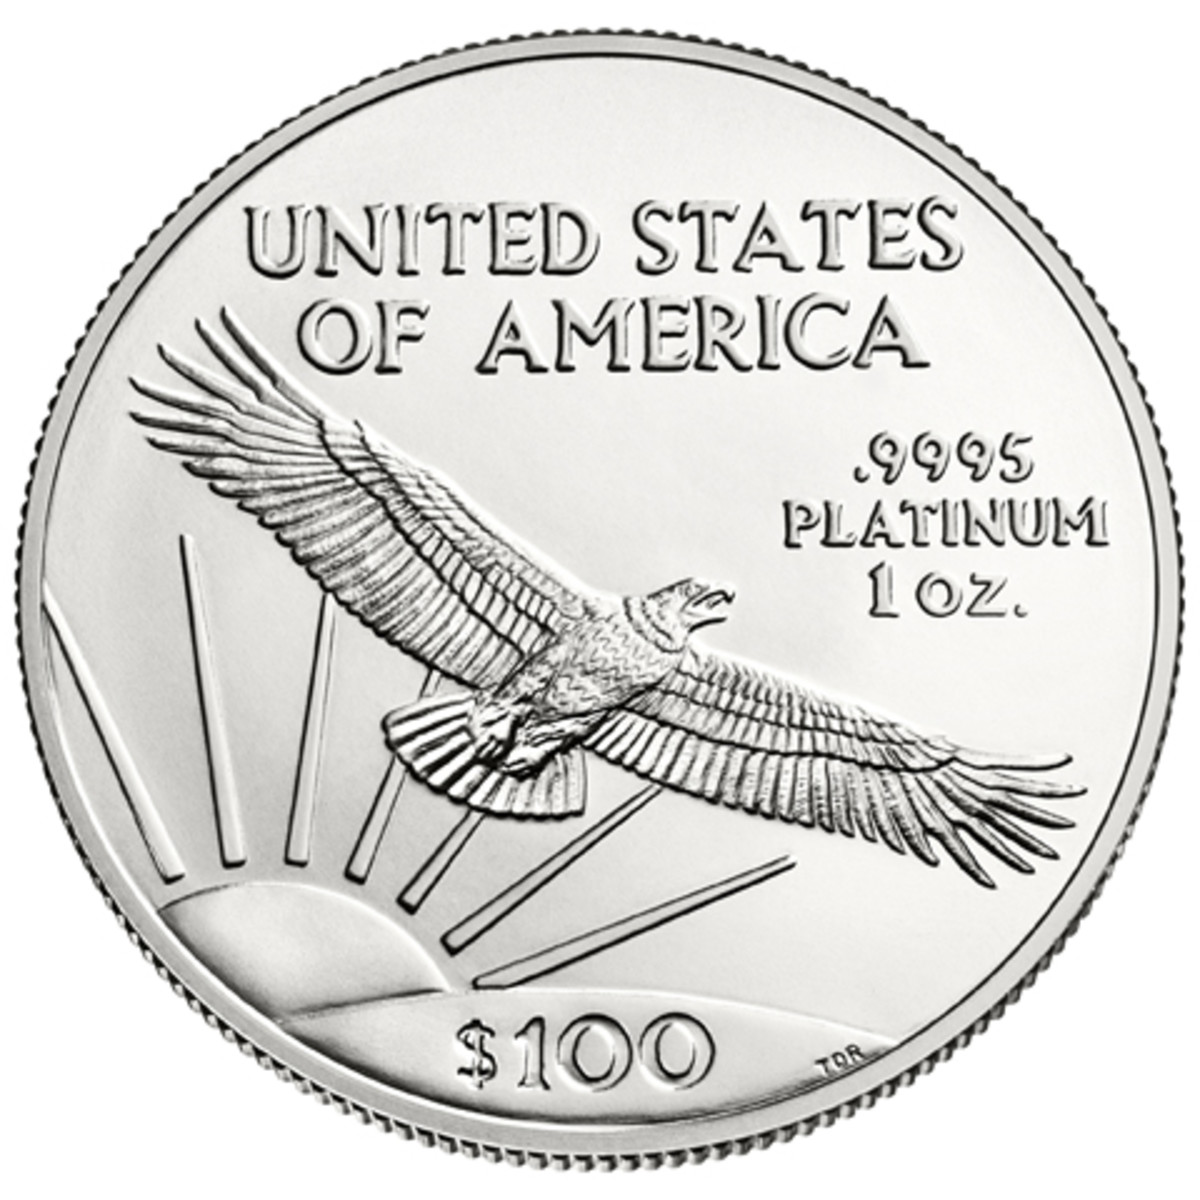 More than 17,000 one-ounce platinum bullion American Eagle coins were snapped up  by Authorized Purchasers July 25.